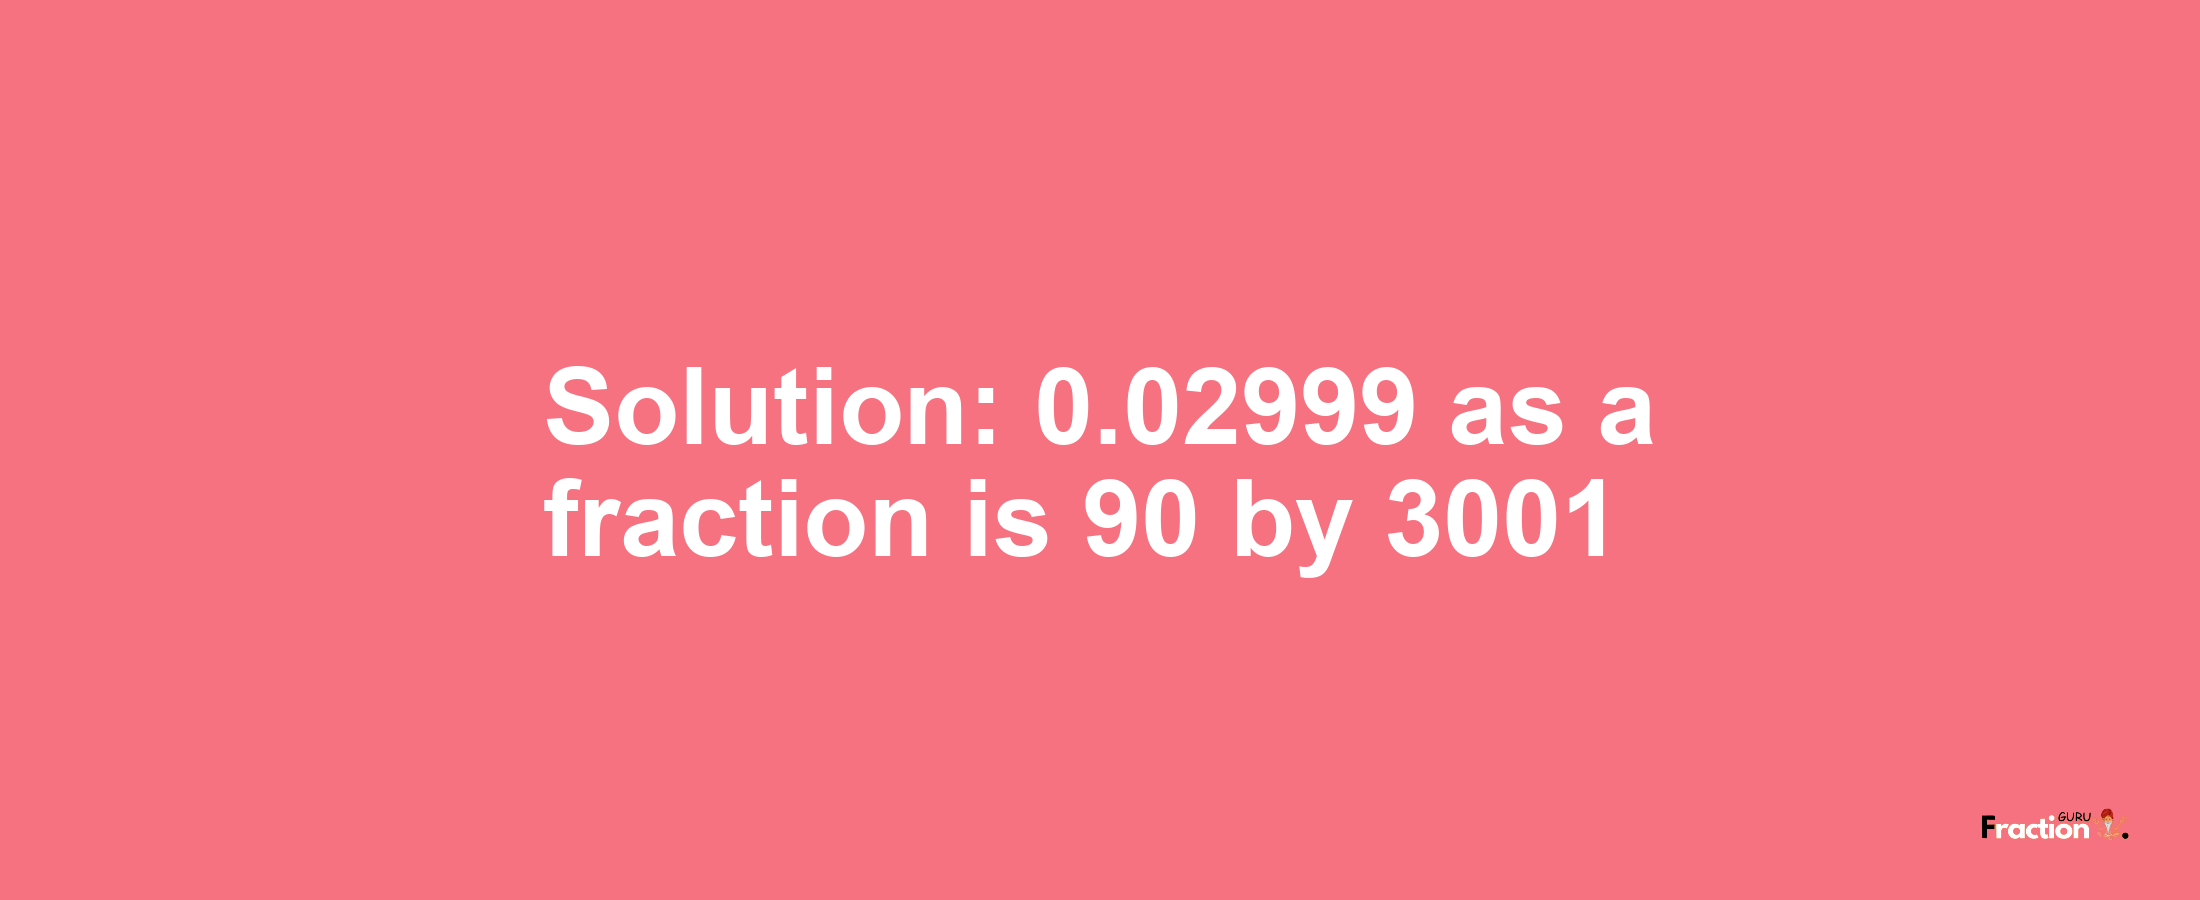 Solution:0.02999 as a fraction is 90/3001